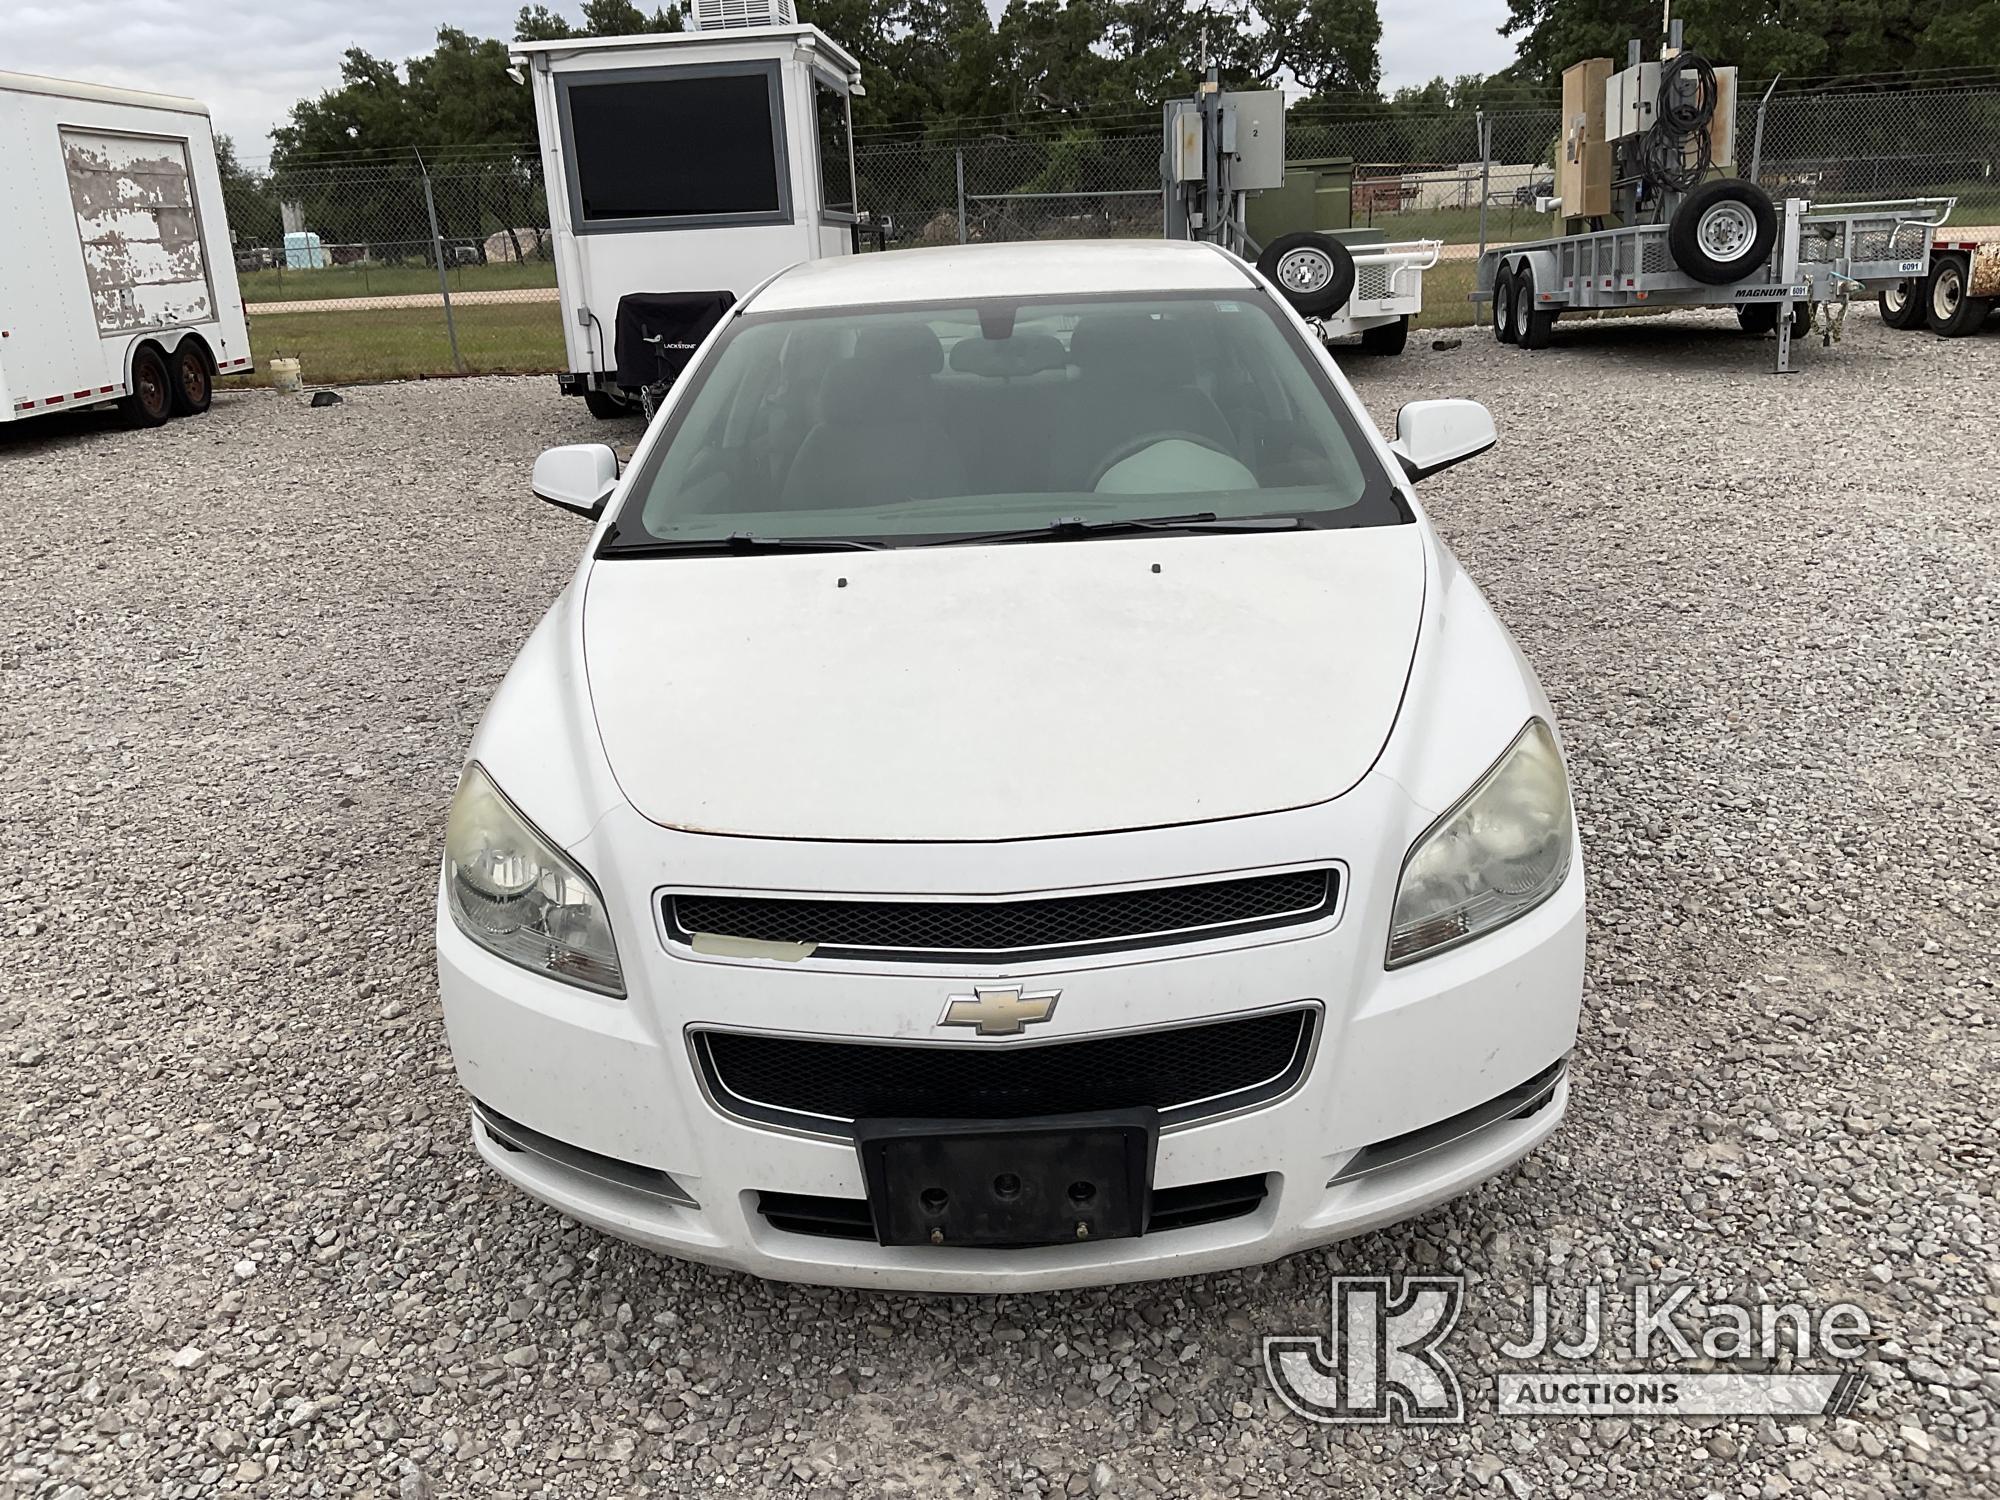 (Johnson City, TX) 2009 Chevrolet Malibu Hybrid Vehicle, , Cooperative owned and maintained Runs & M